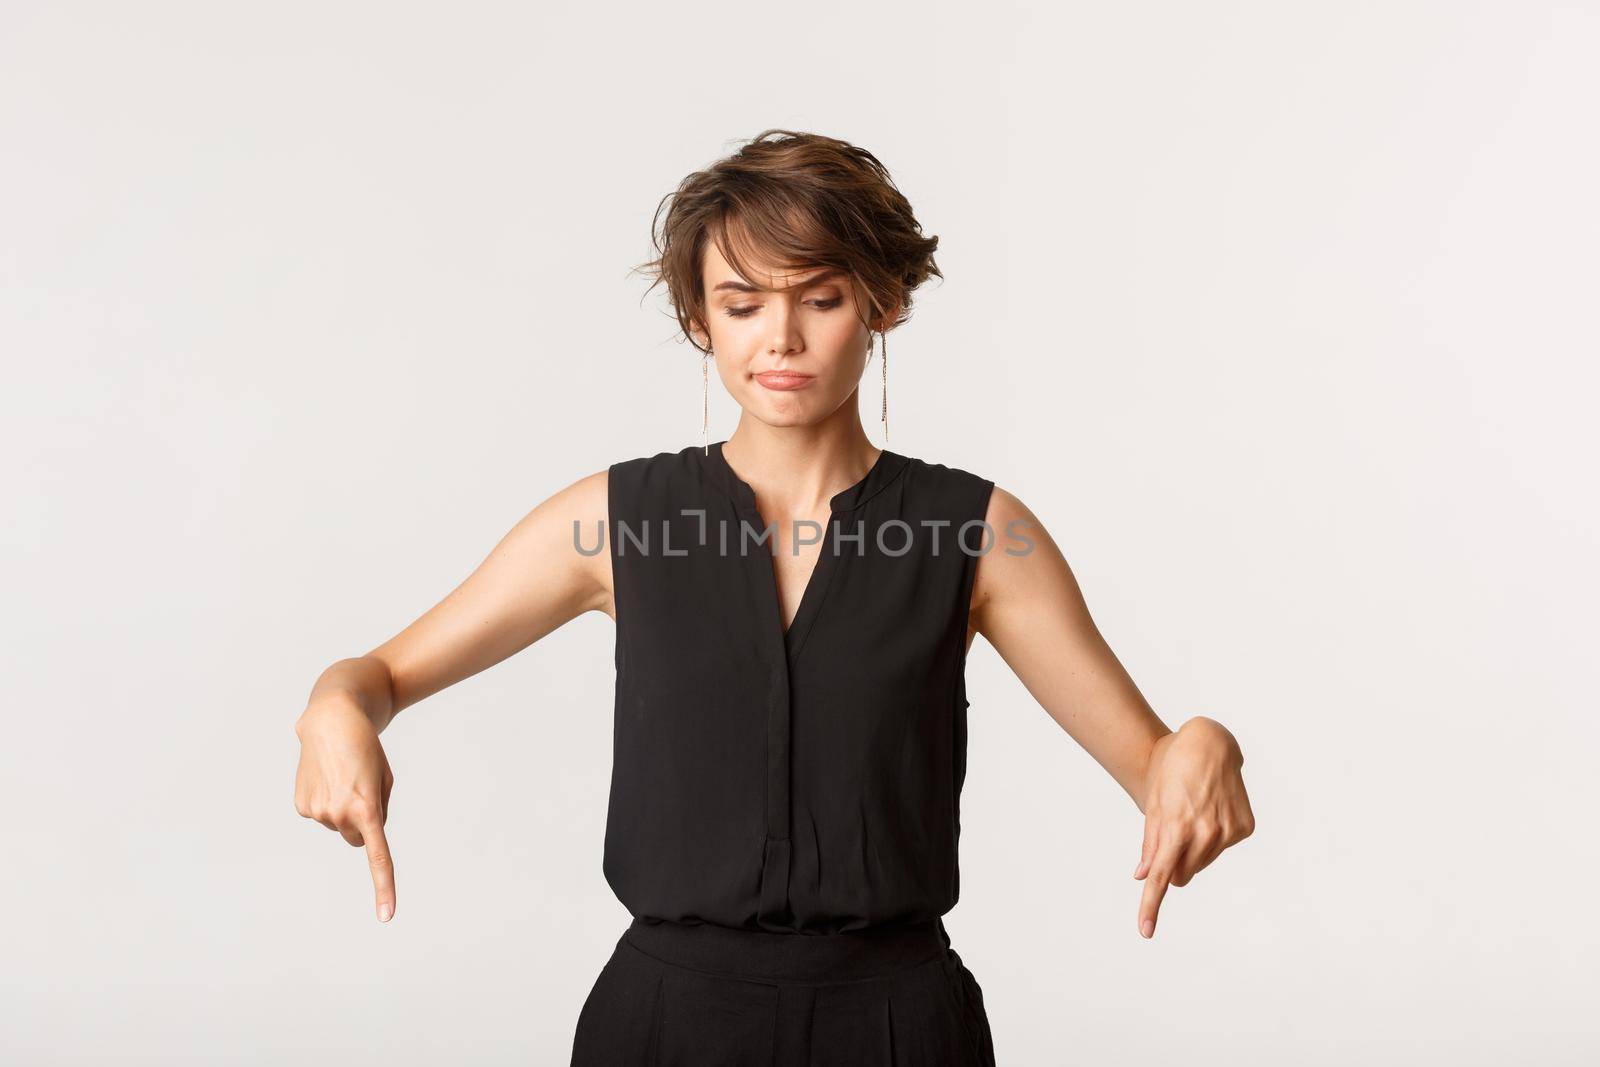 Skeptical and doubtful young caucasian woman smirk hesitant, pointing and looking down, white background.